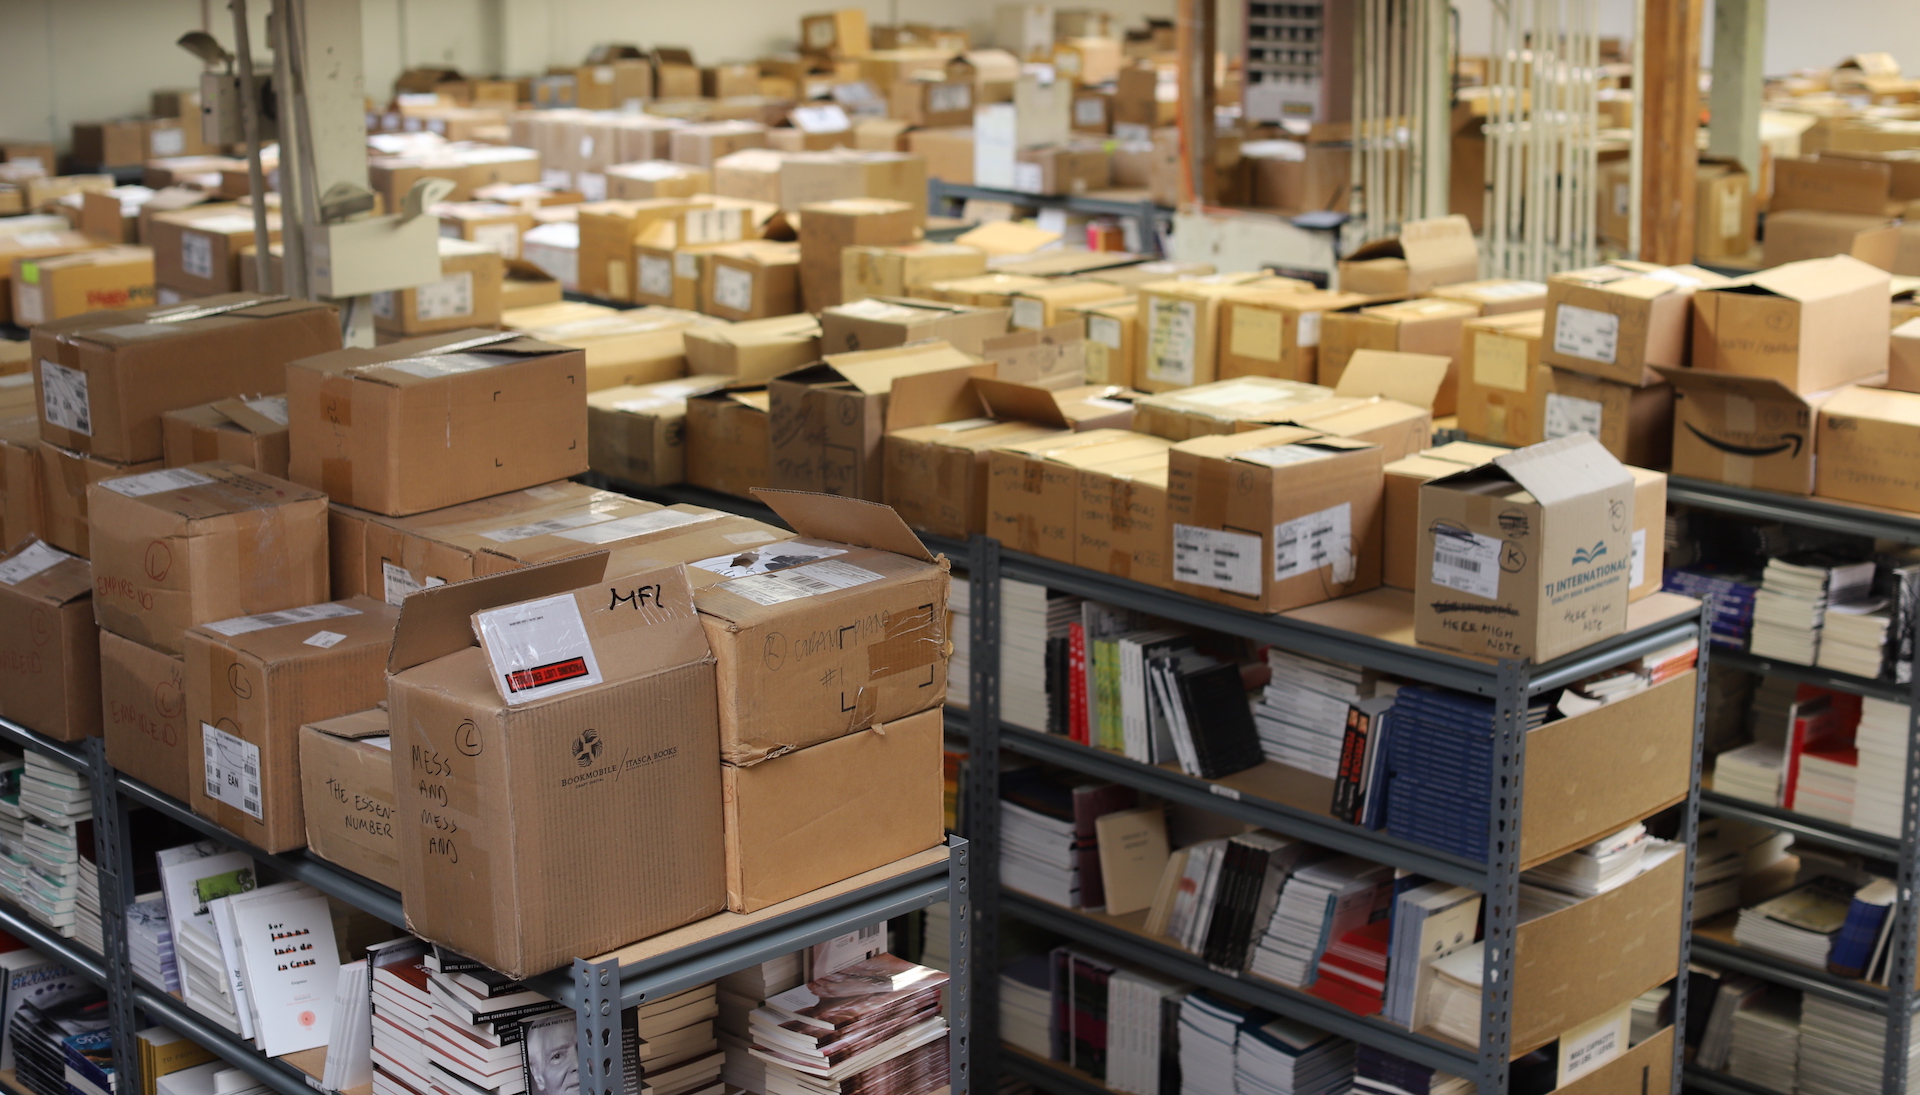 Small Press Distribution currently warehouses some 350,000 books.